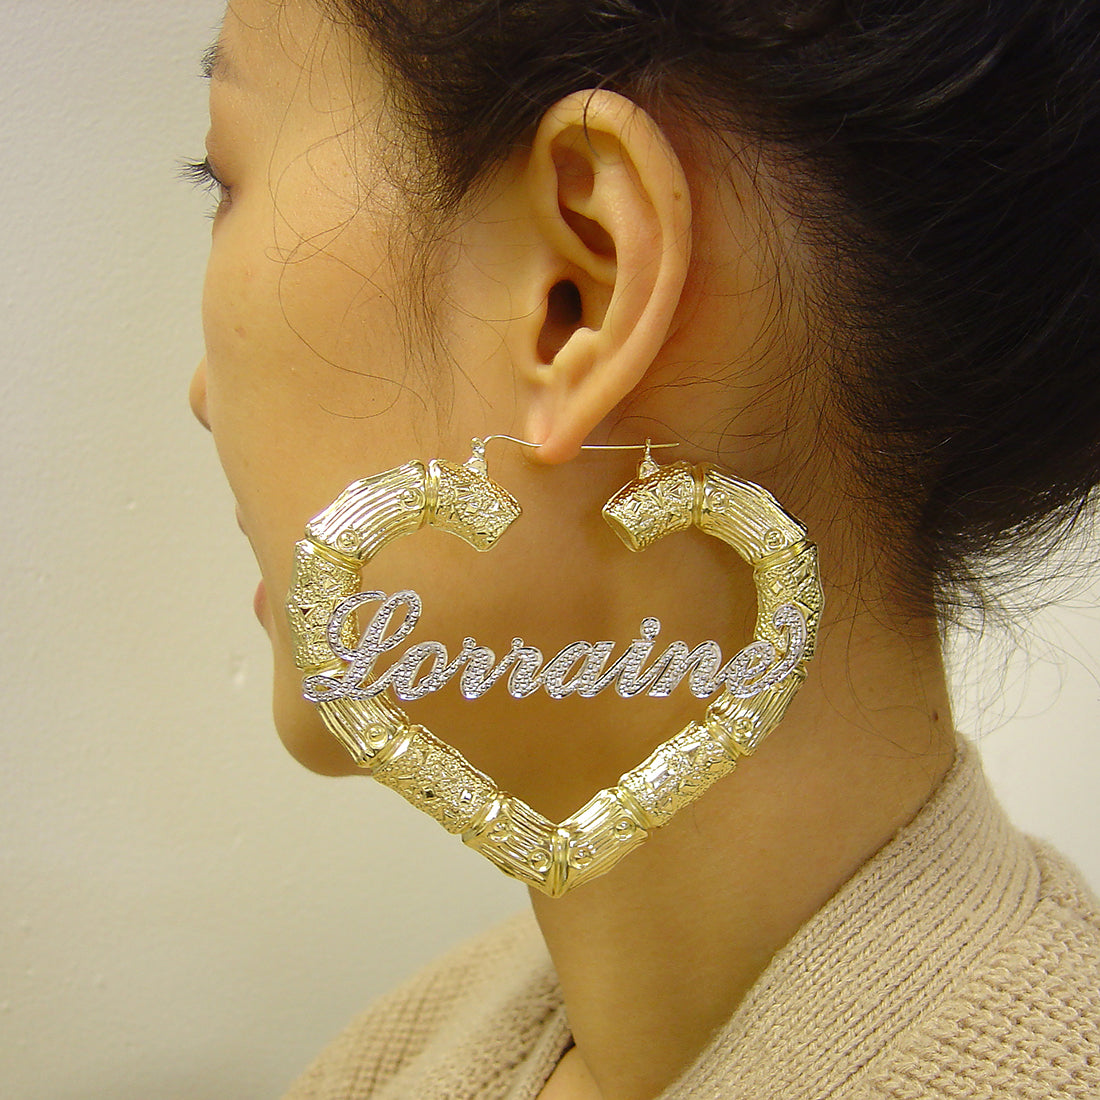 Extra Large 10k Iced Out Diamond Accent Name Puffy Heart Bamboo Earrings 3.5 Inches 2 Tone Fine Jewelry